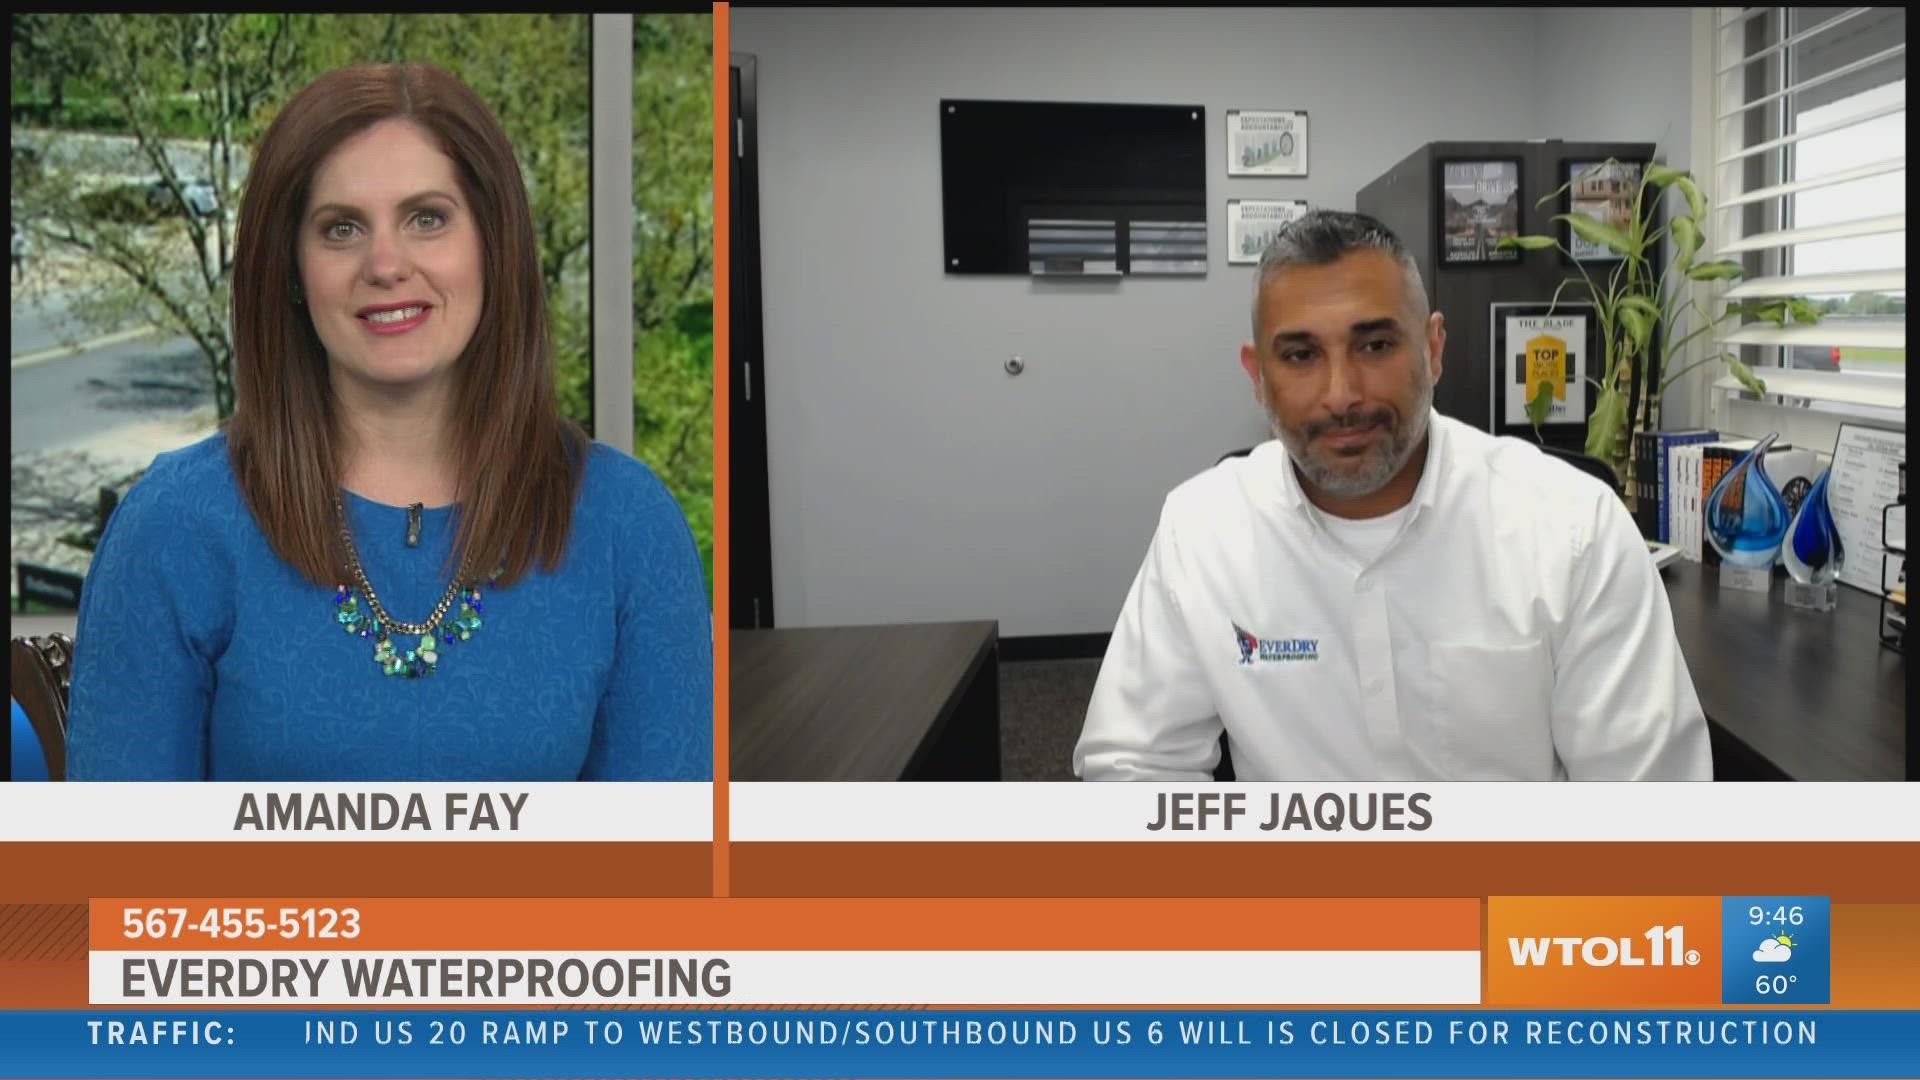 Your Day: Everdry Waterproofing Jeff Jaques - June 9